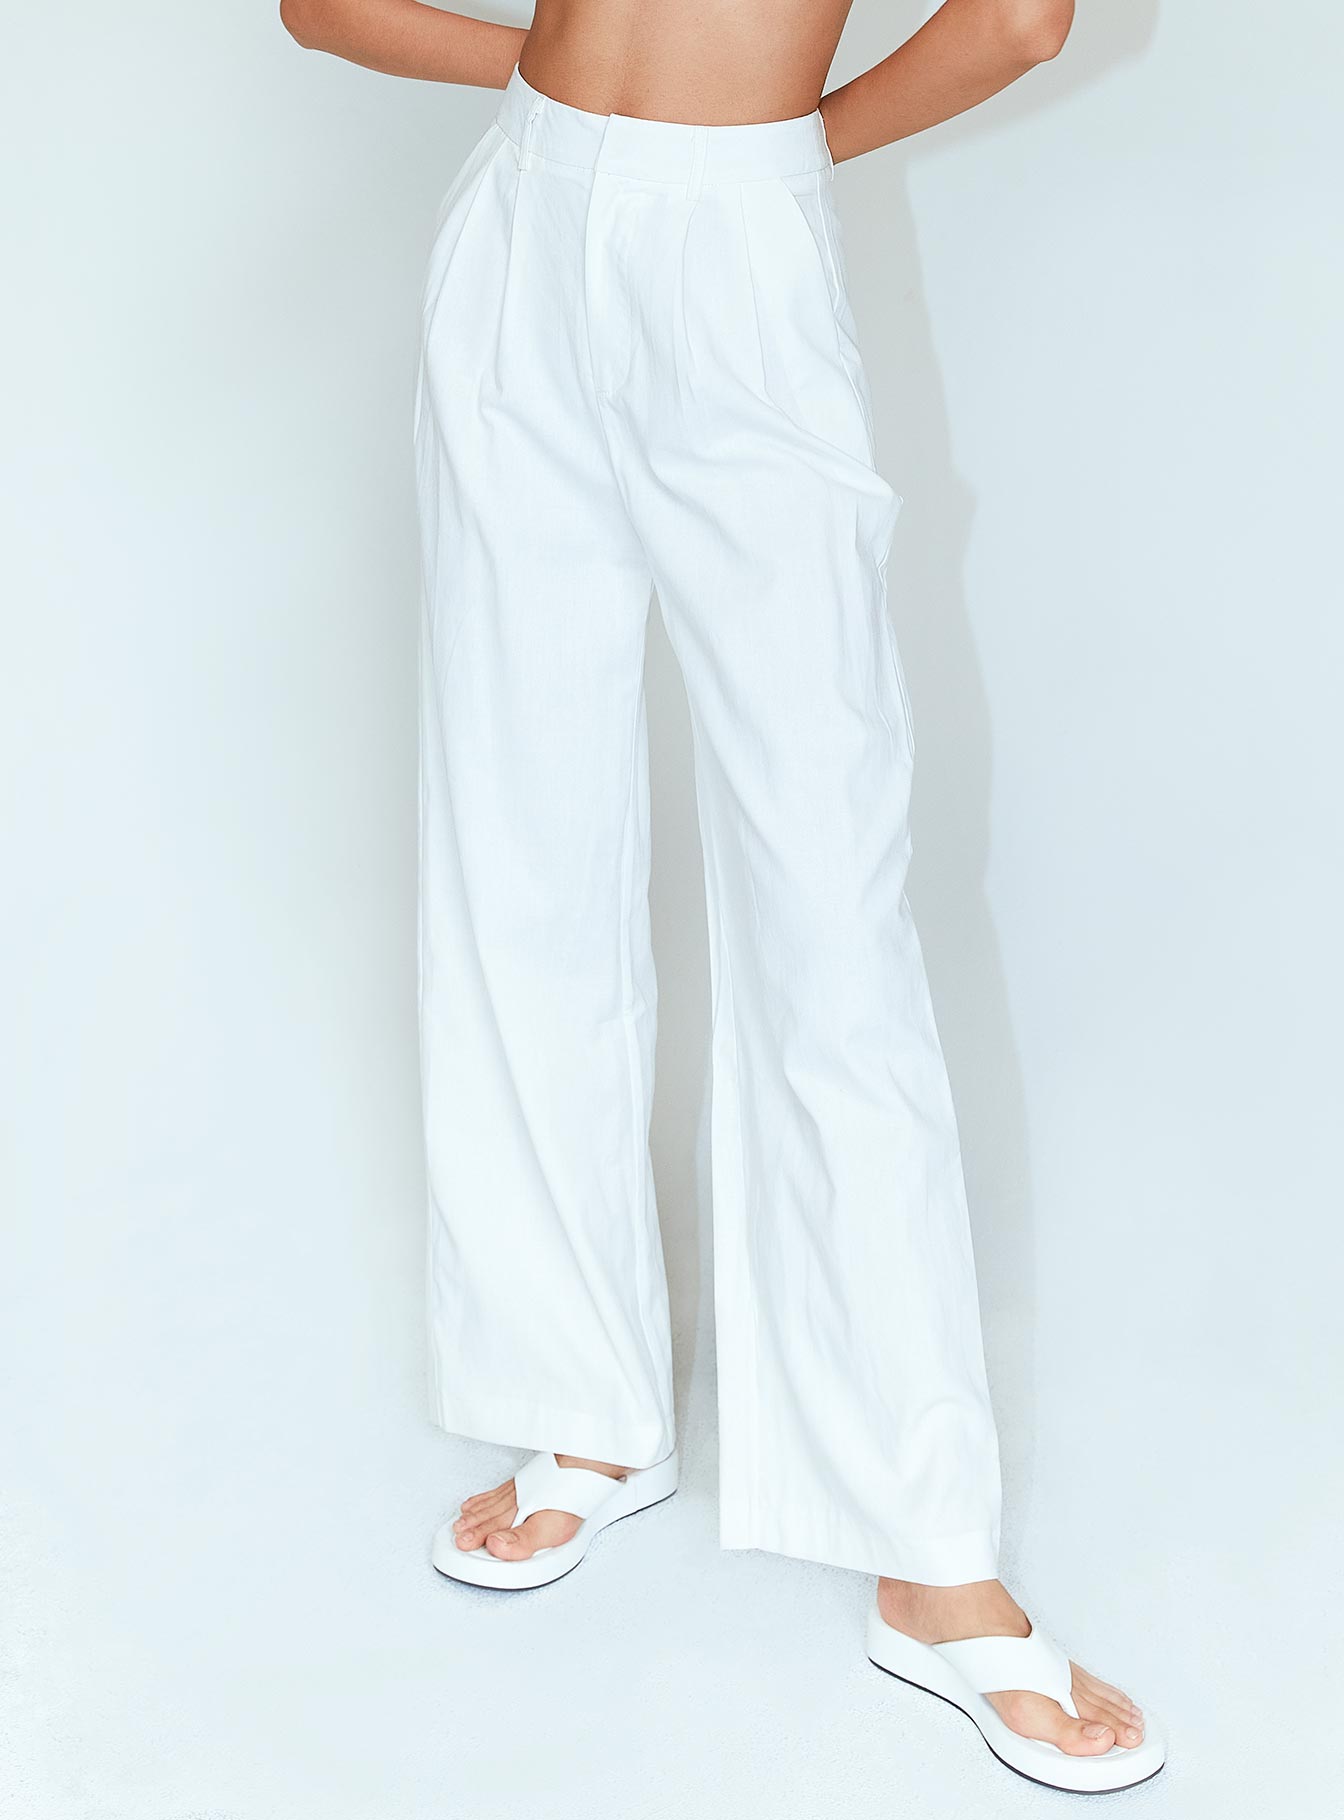 Buy White Cotton Pencil Pants for Women Size XXL 32 to 38 inch at Amazon.in